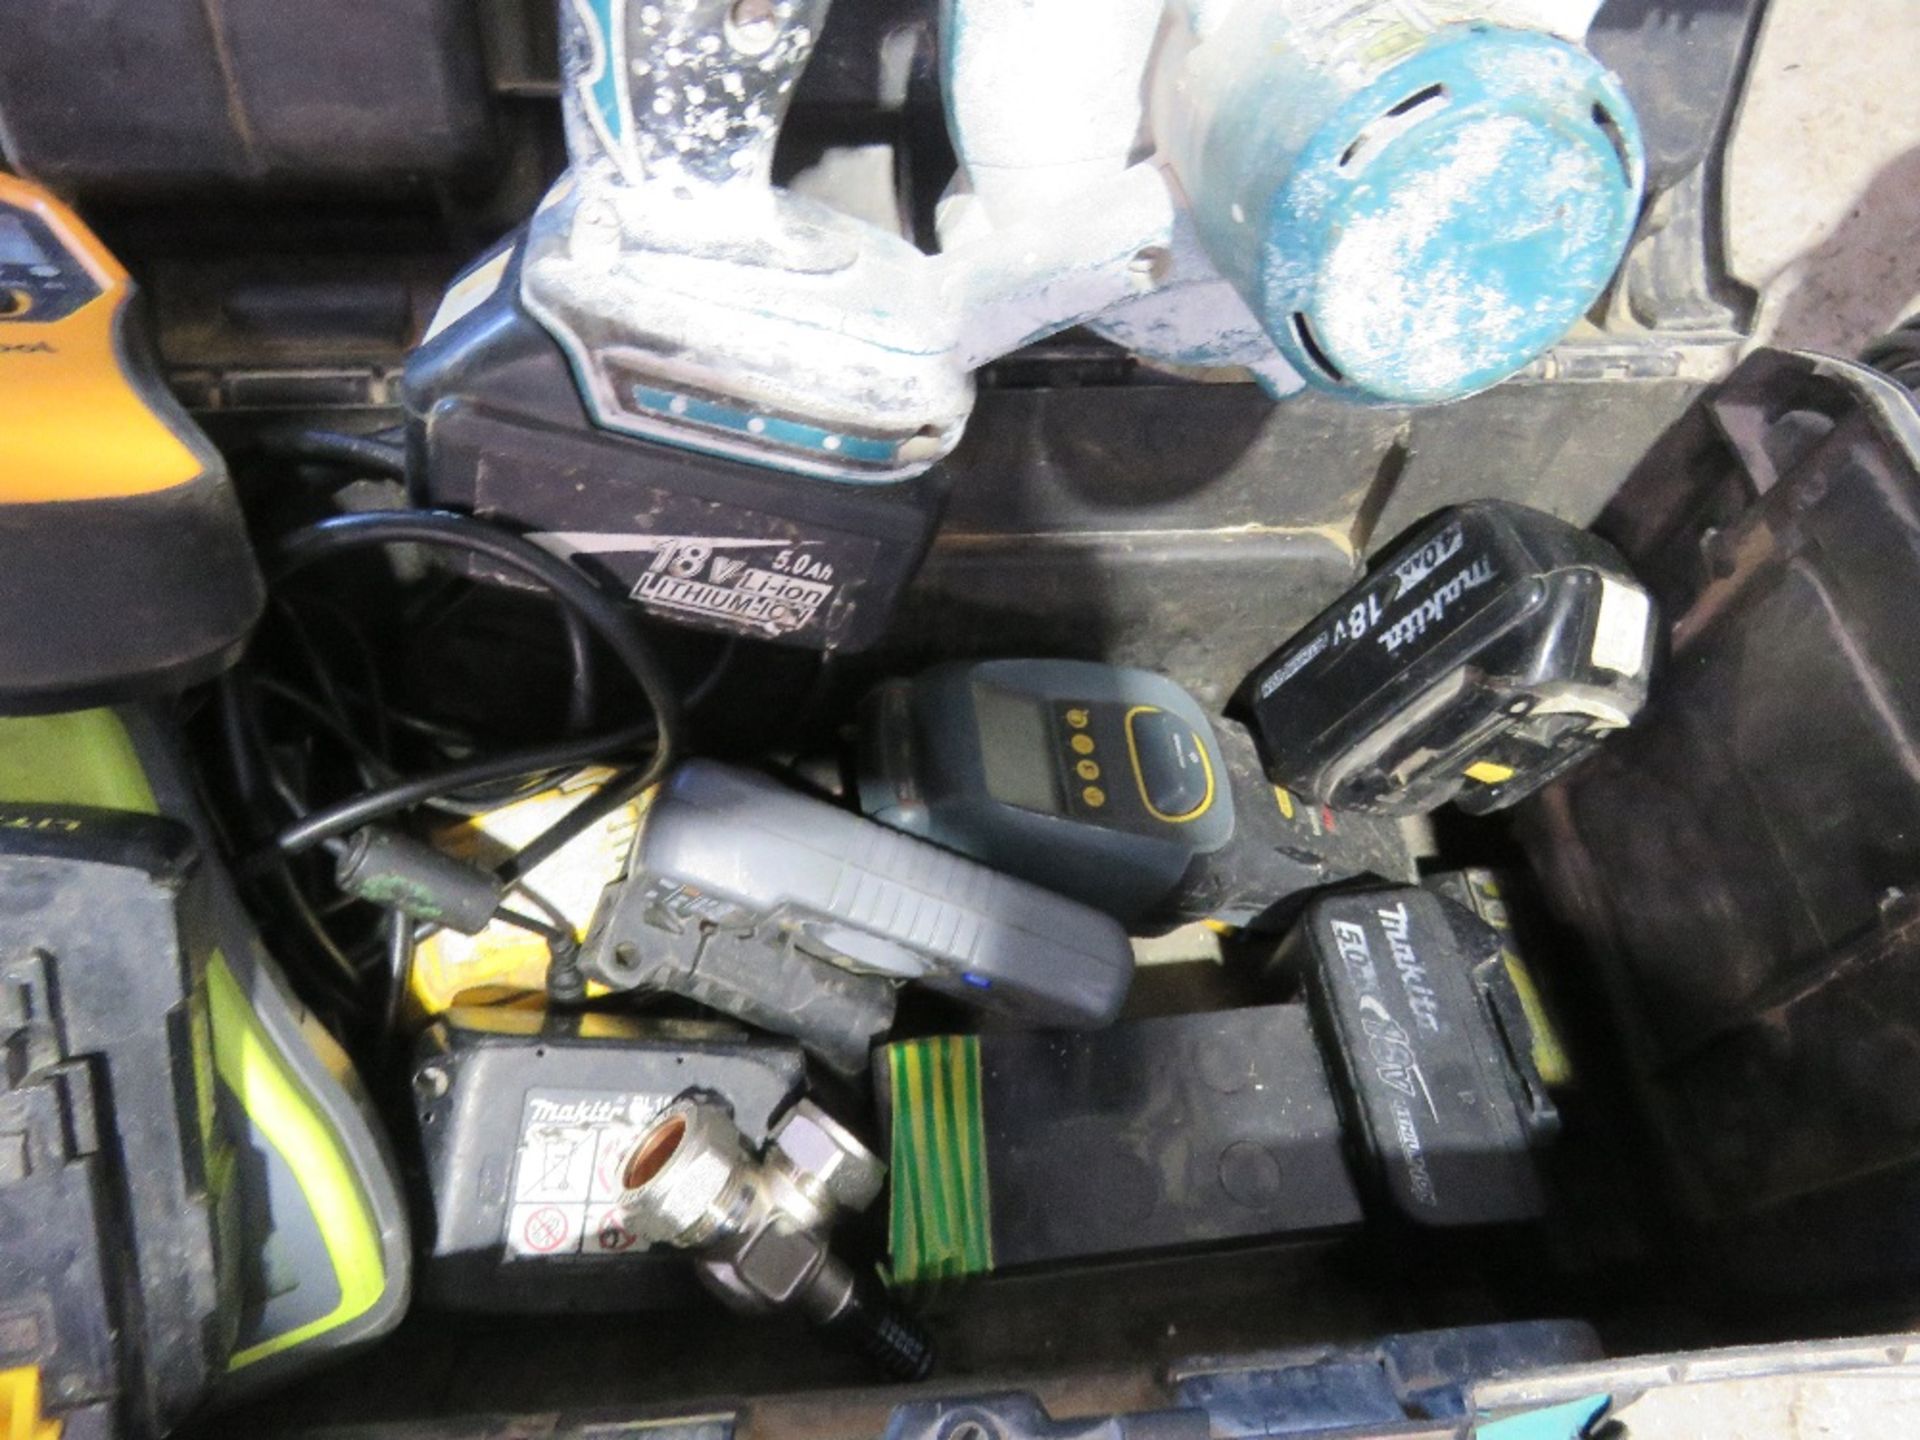 BAG AND TOOL BOX OF BATTERY TOOL ITEMS ETC. - Image 2 of 5